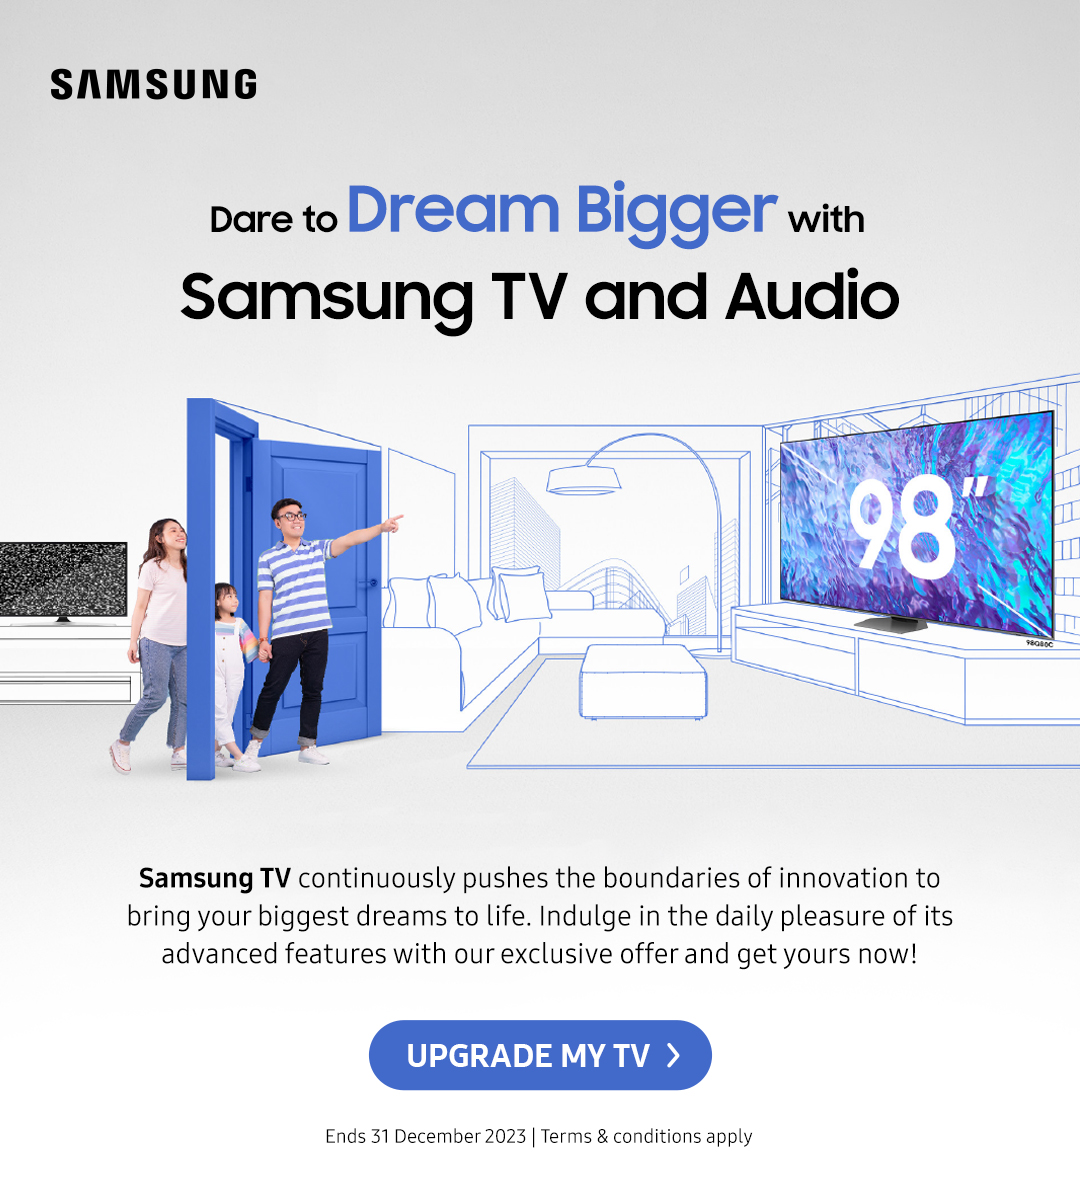 Samsung TV continuously pushes the boundaries of innovation to bring your biggest dreams to life. Indulge in the daily pleasure of its advanced features with our exclusive offer and get yours now!